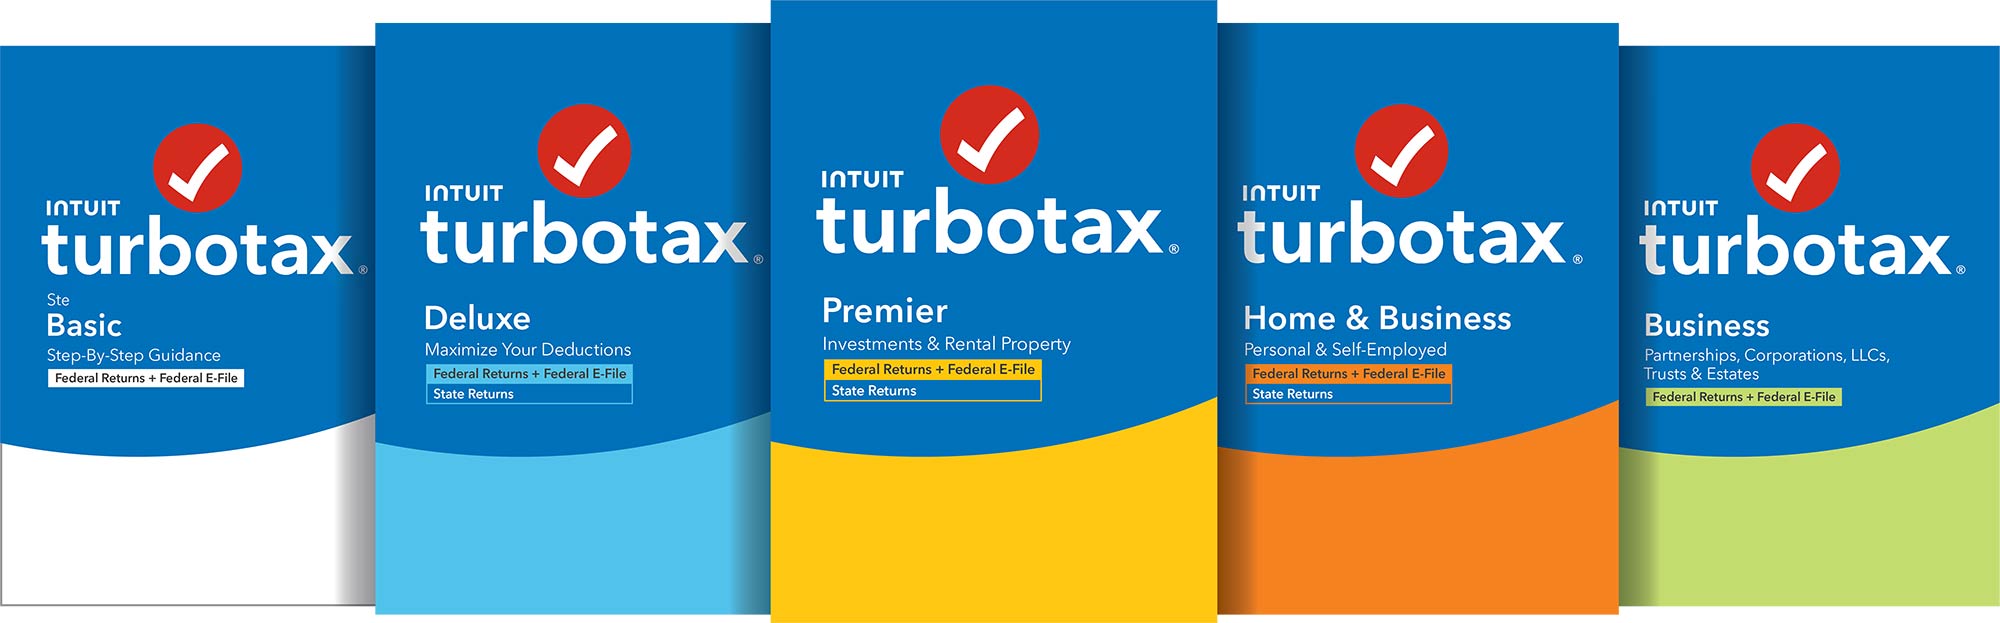 quicken turbotax products selector